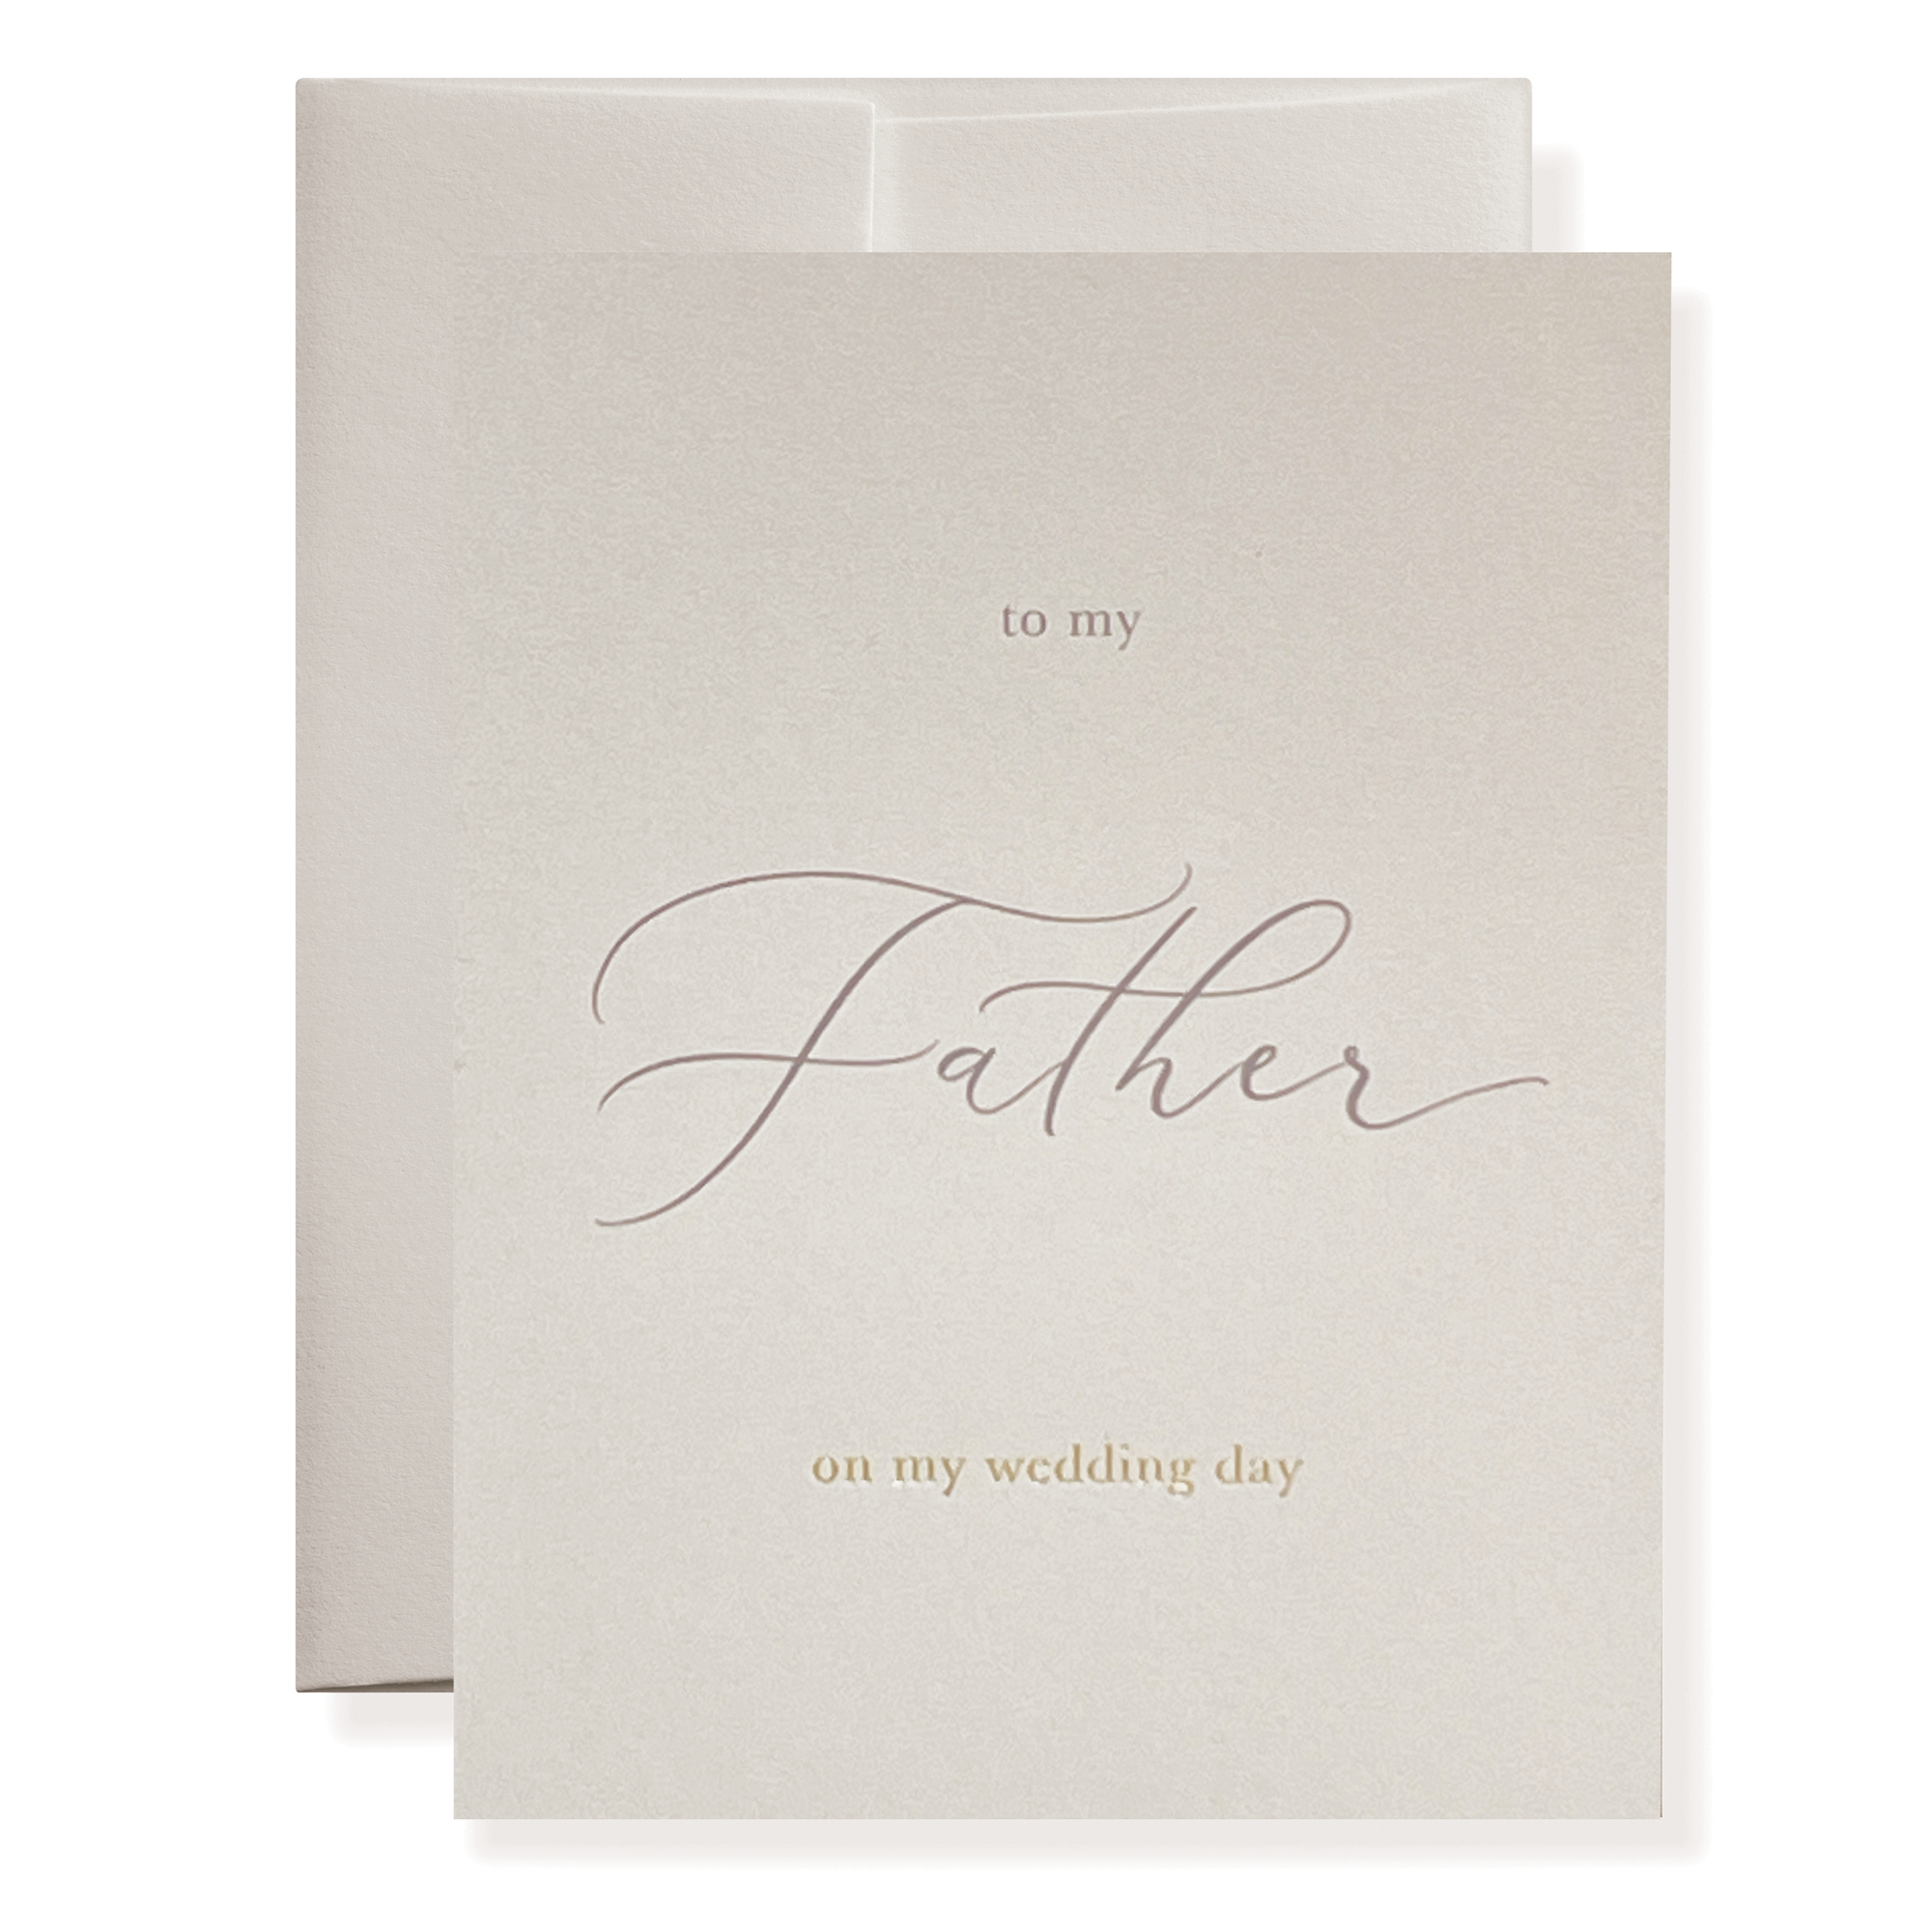 To My Father Greeting Card